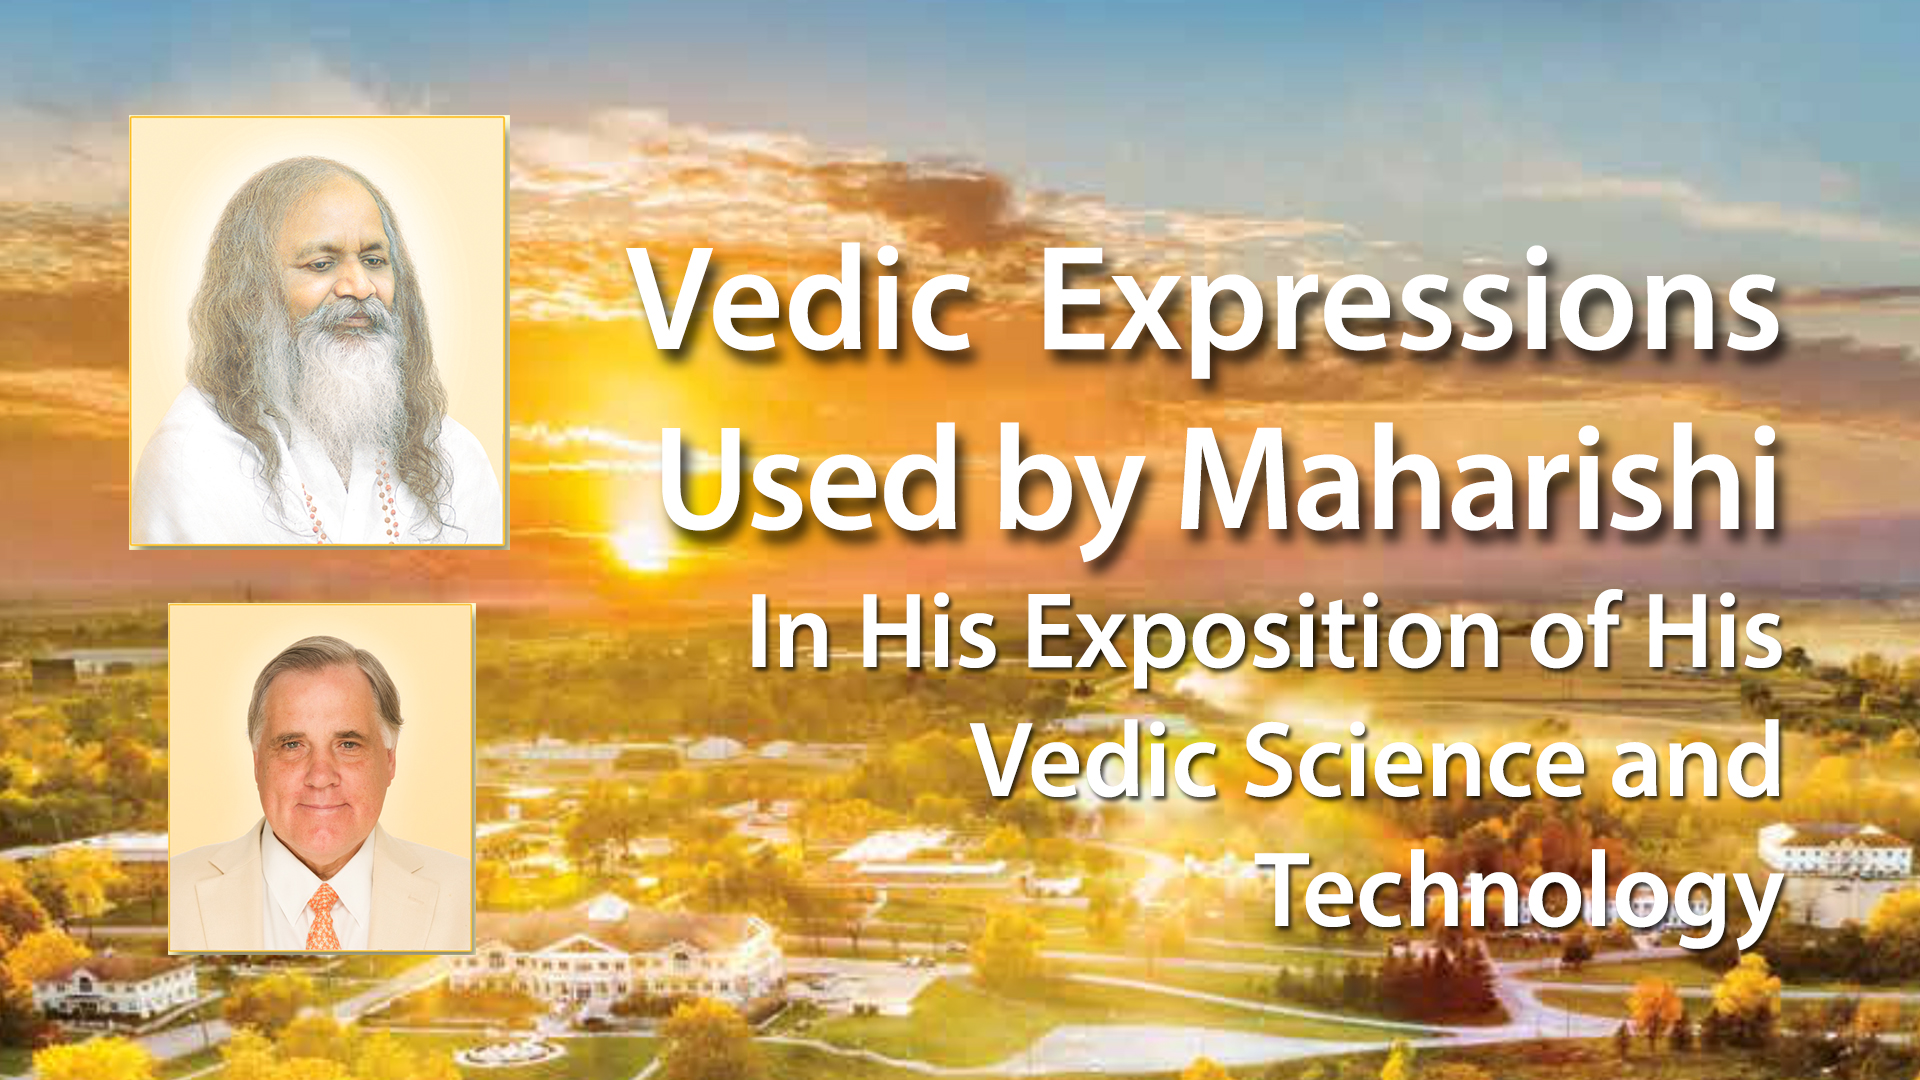 Vedic Expressions Used by Maharishi Mahesh Yogi in His Exposition of His Vedic Science and Technology * images of Maharishi Mahesh Yogi and Dr. Bevan Morris